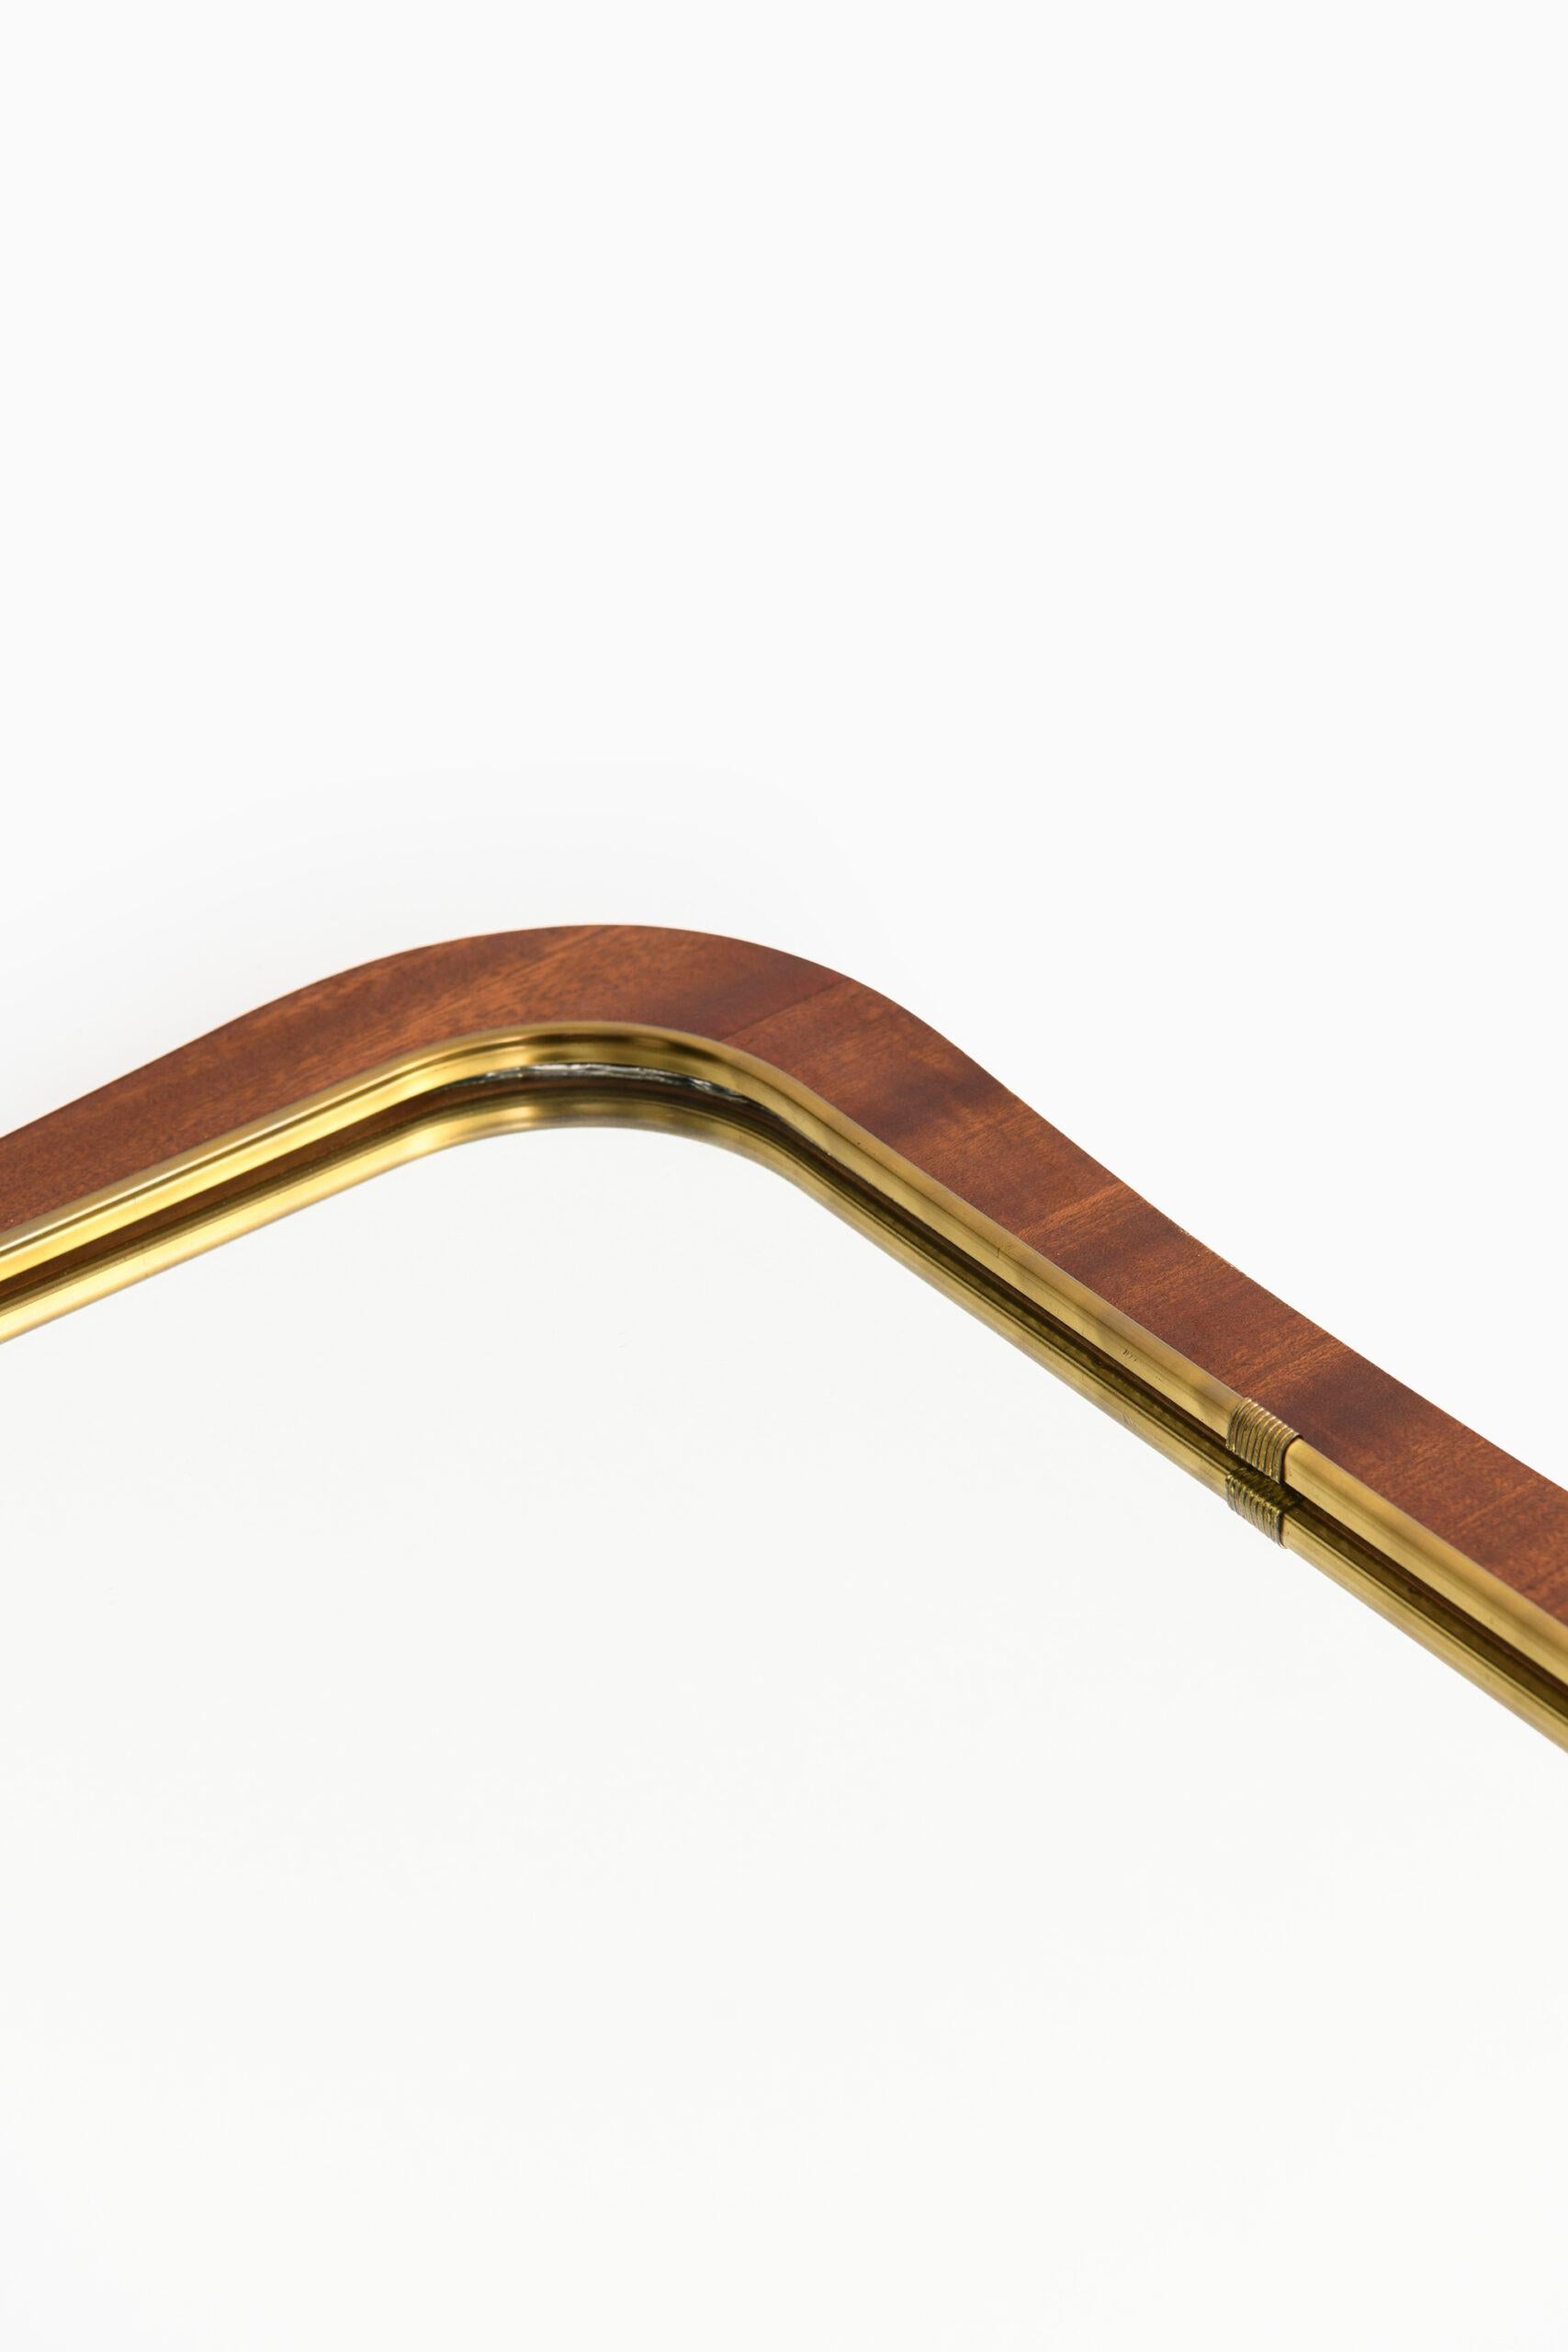 Mirror in mahogany and brass. Produced in Sweden.